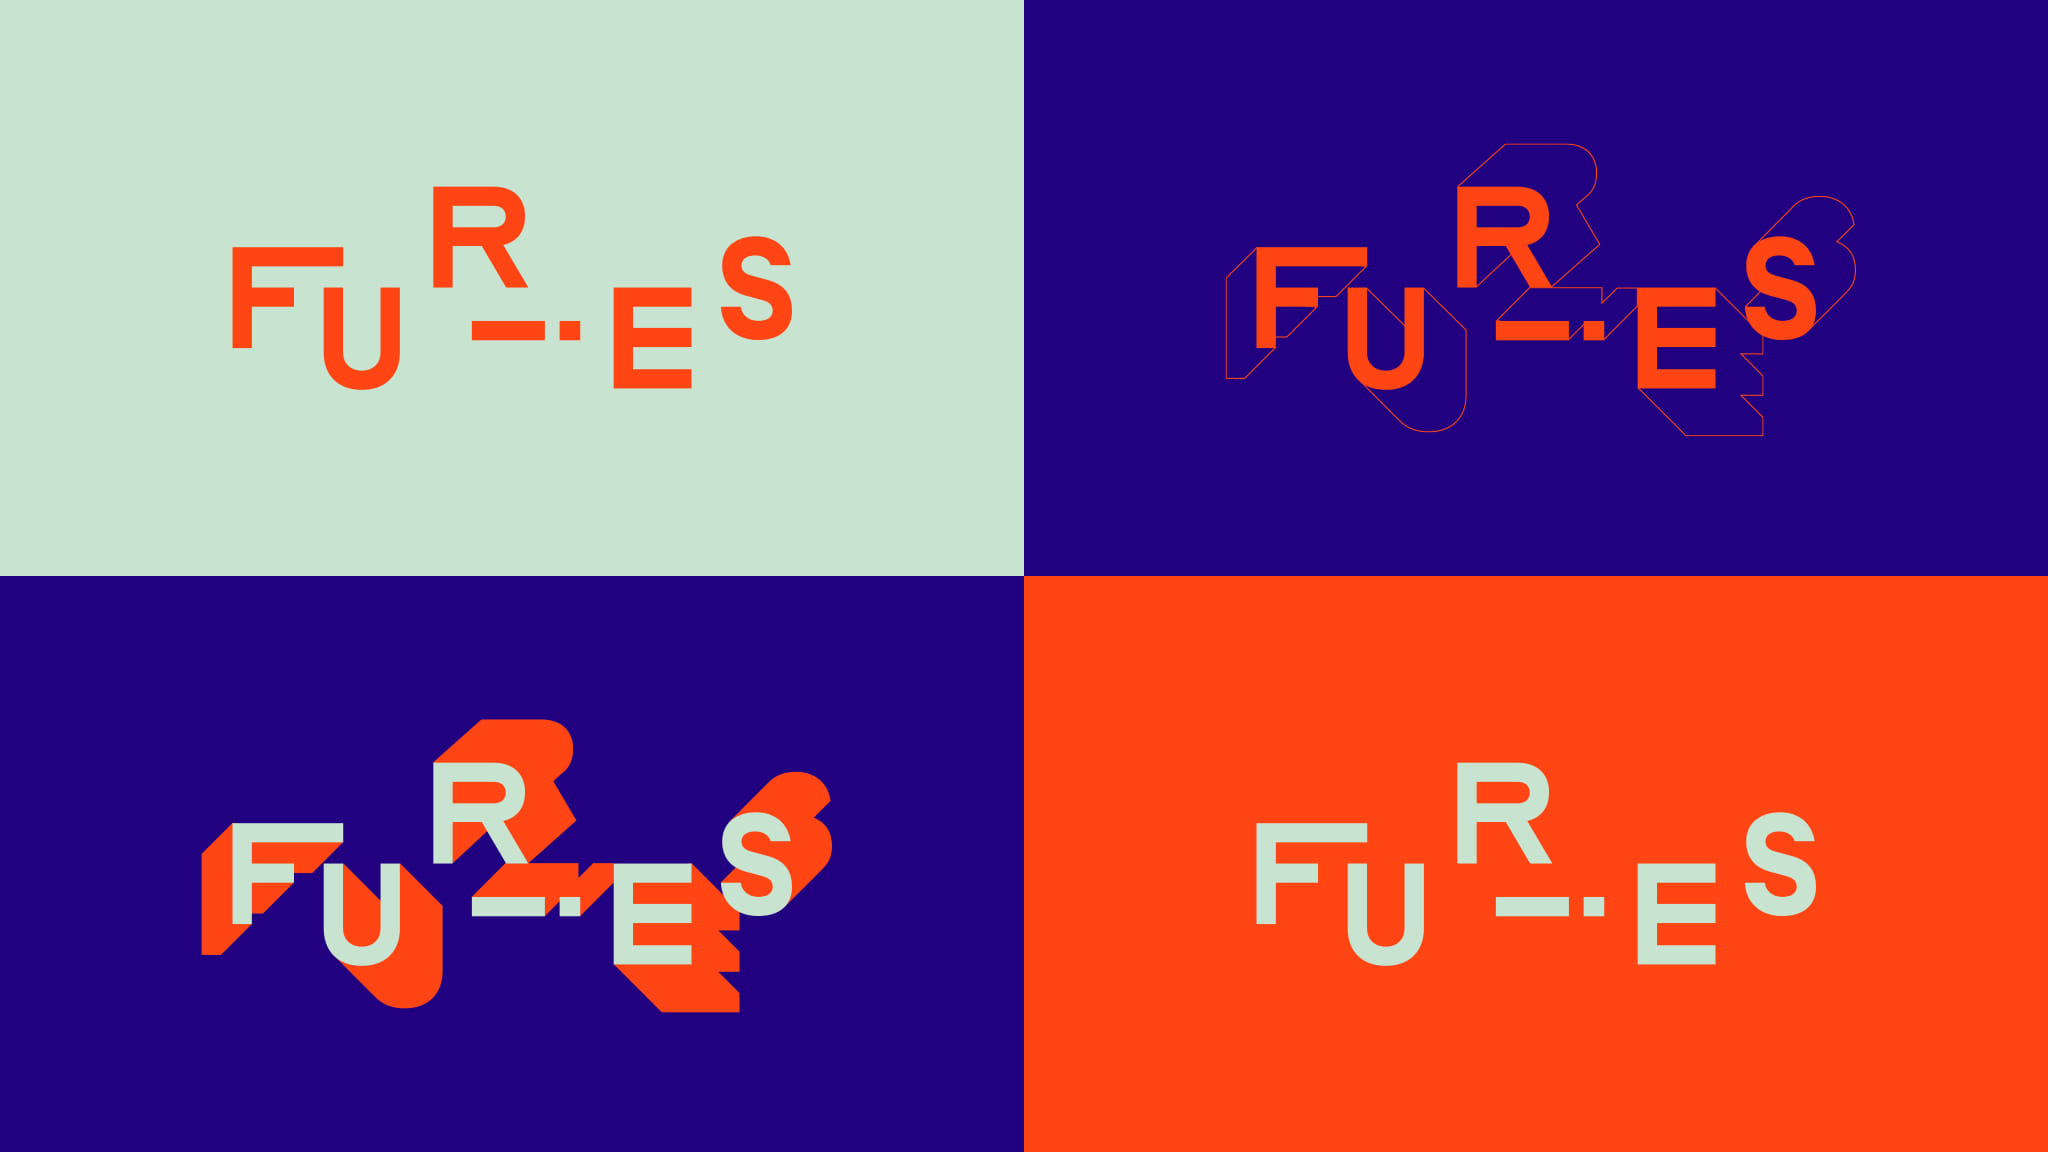 Variants of the Furies logo